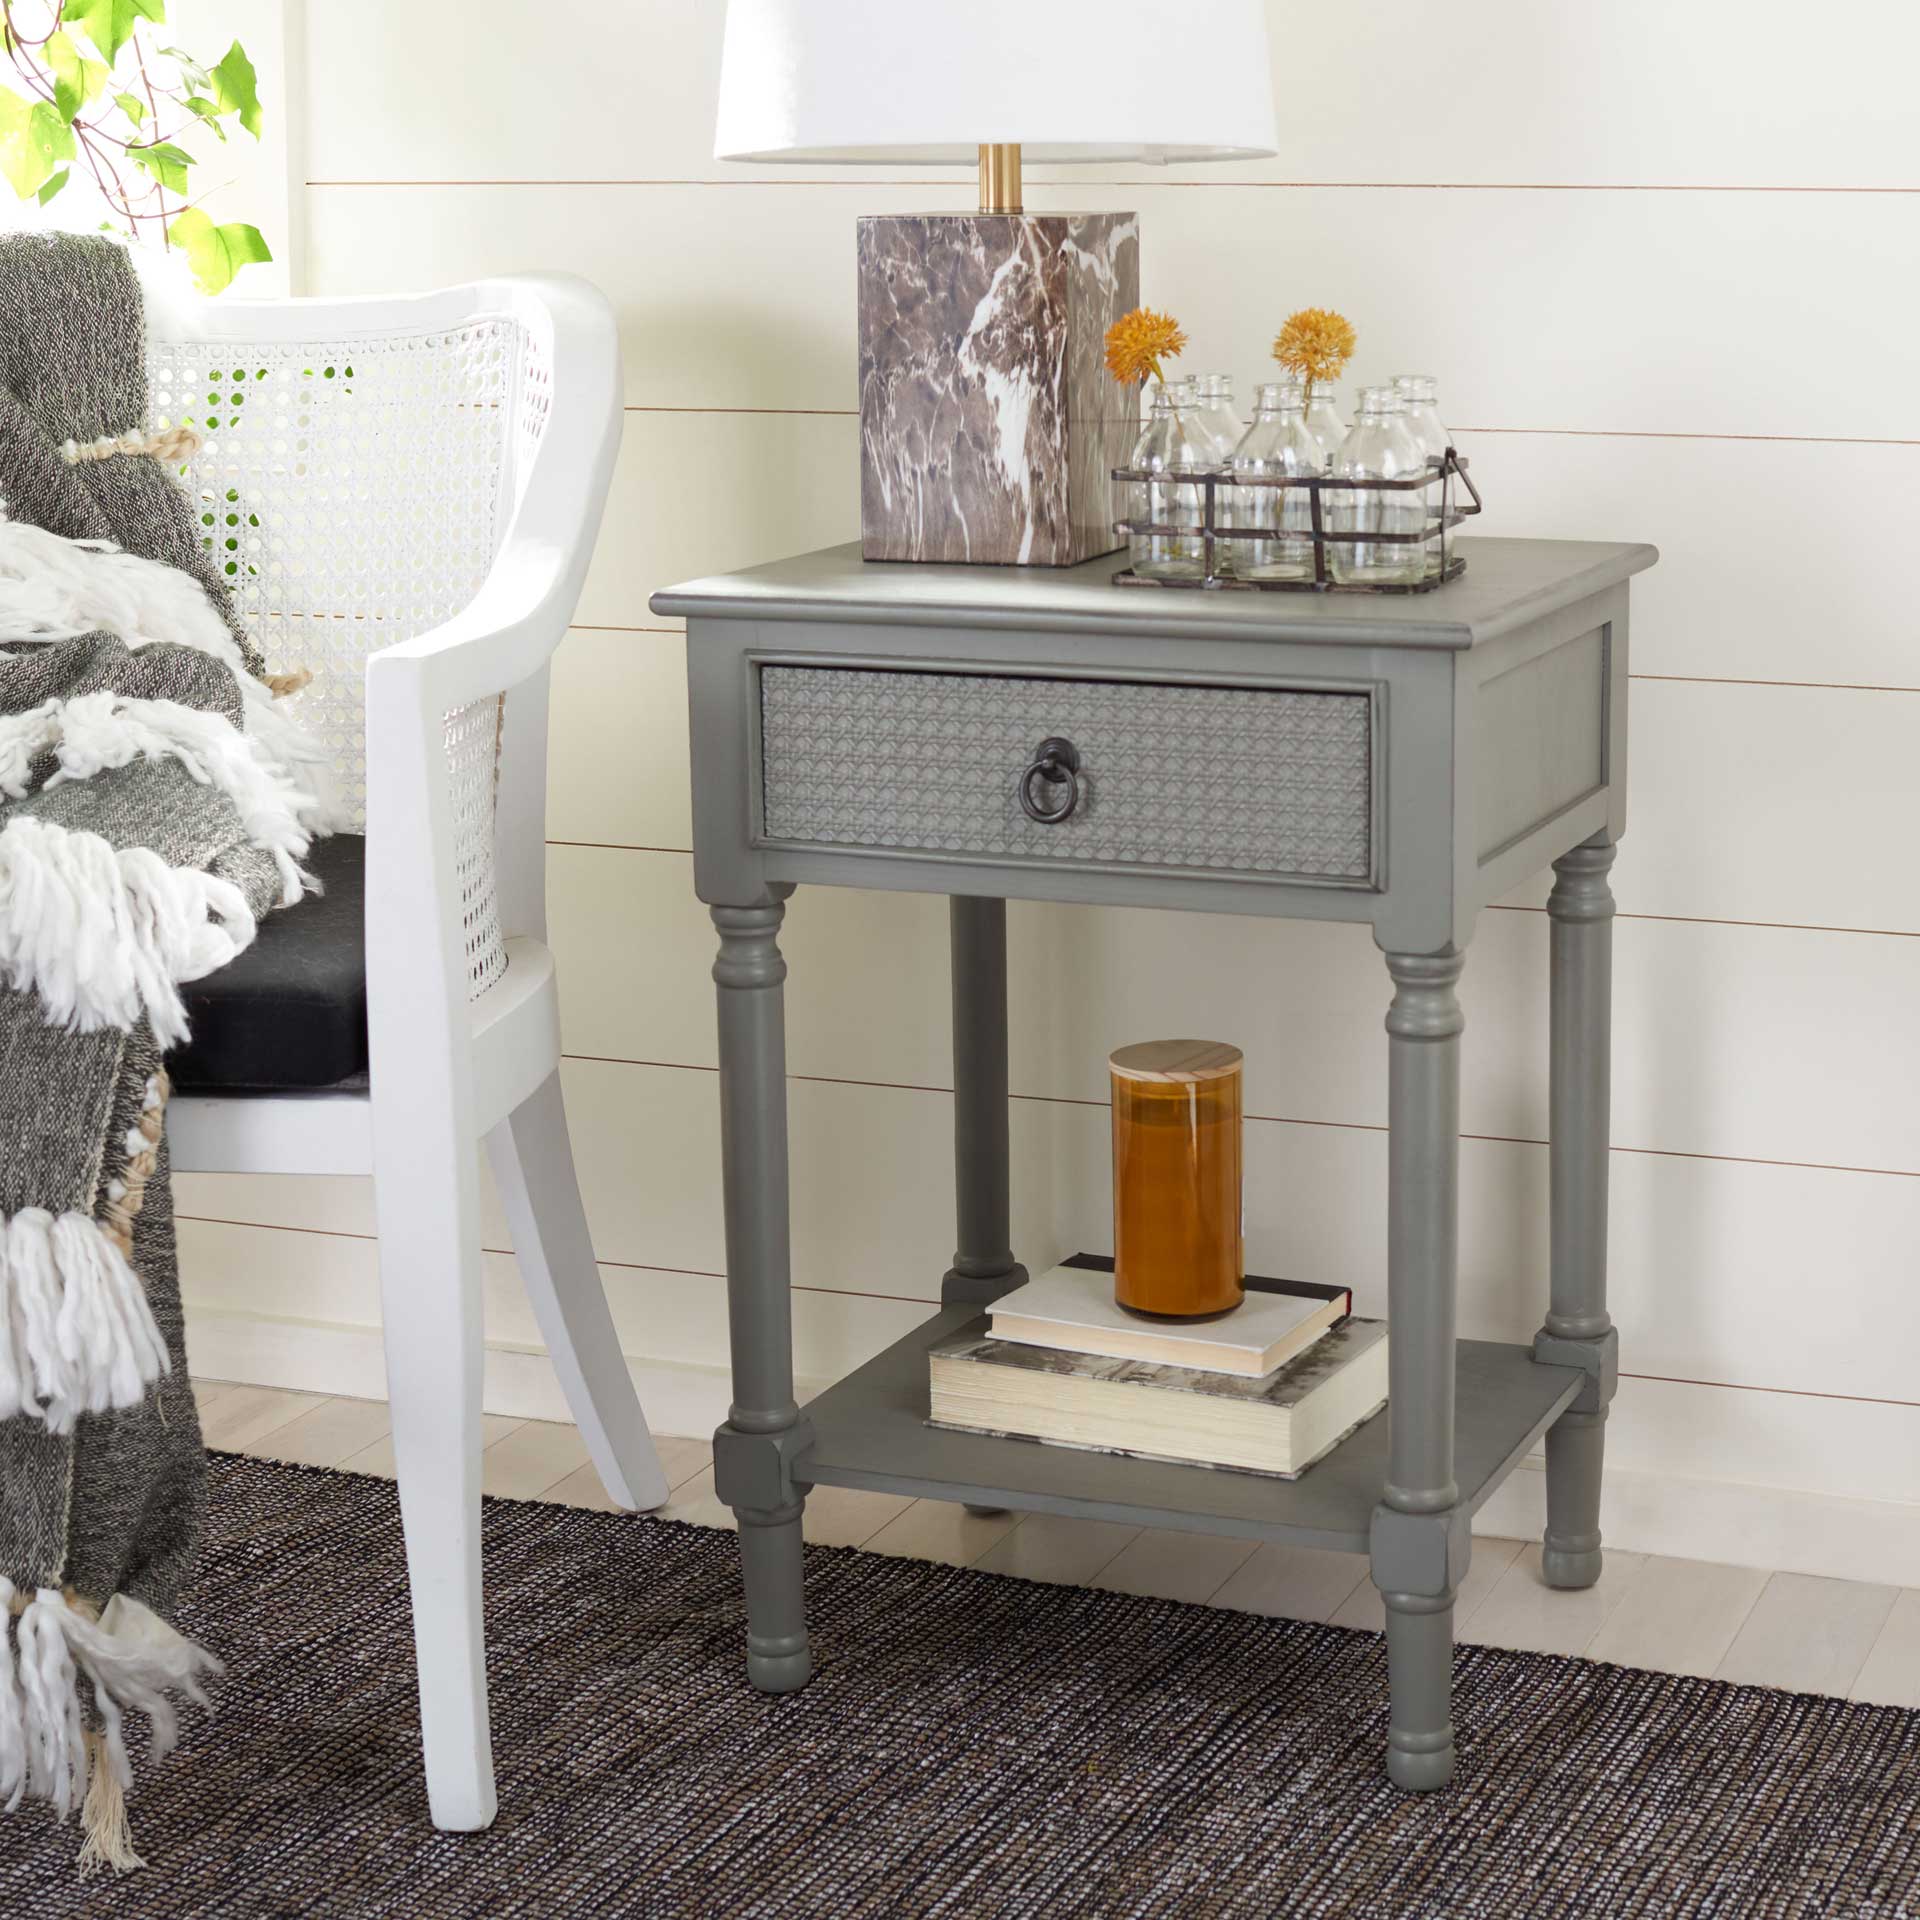 Hale 1 Drawer Accent Table Distressed Gray